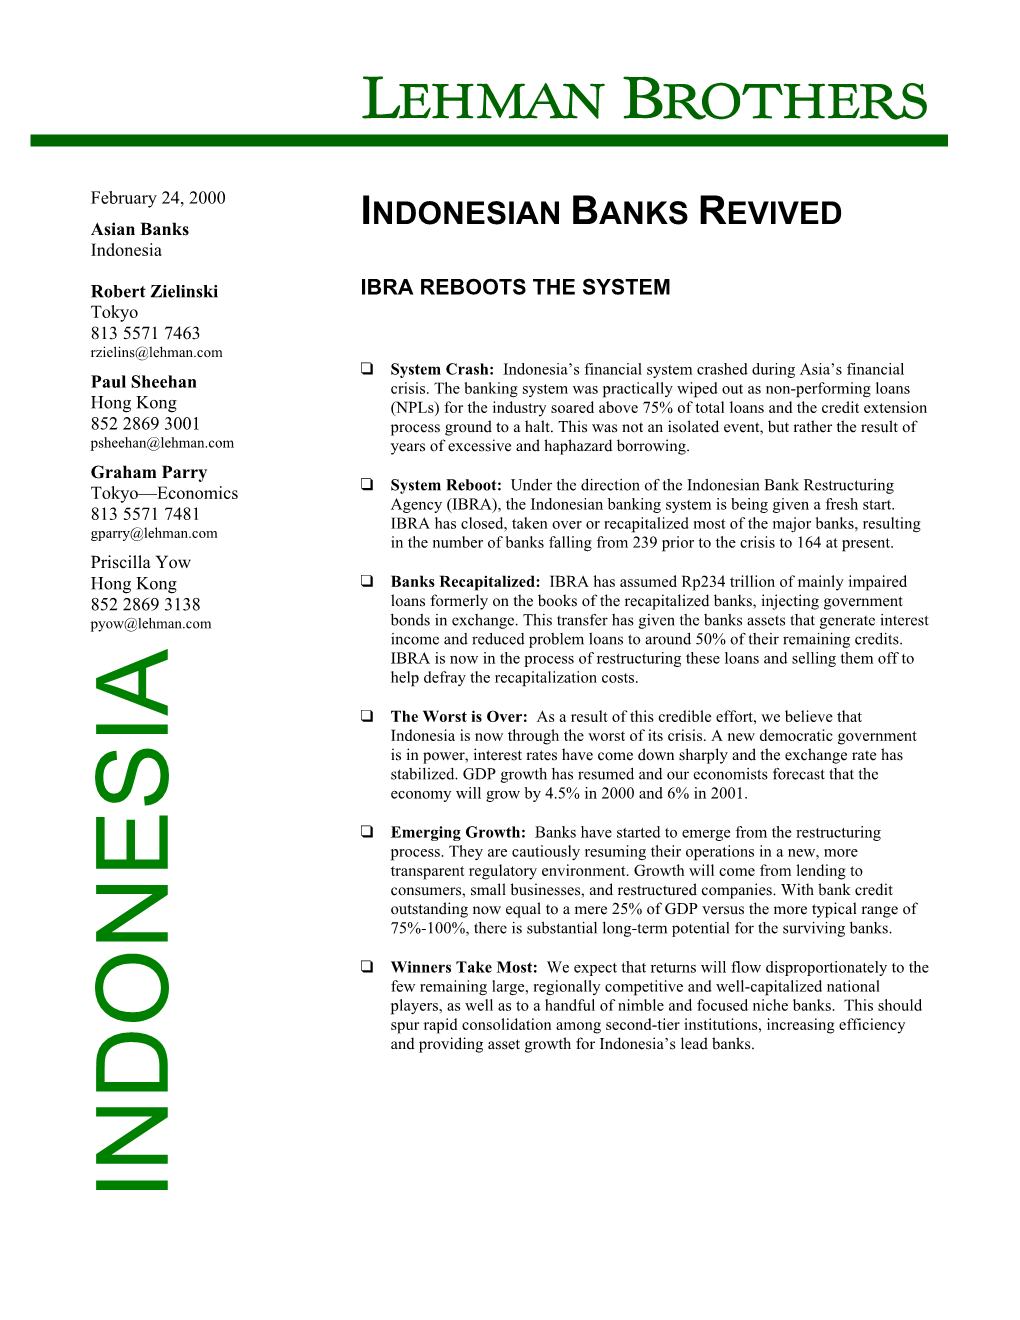 INDONESIAN BANKS REVIVED Indonesia